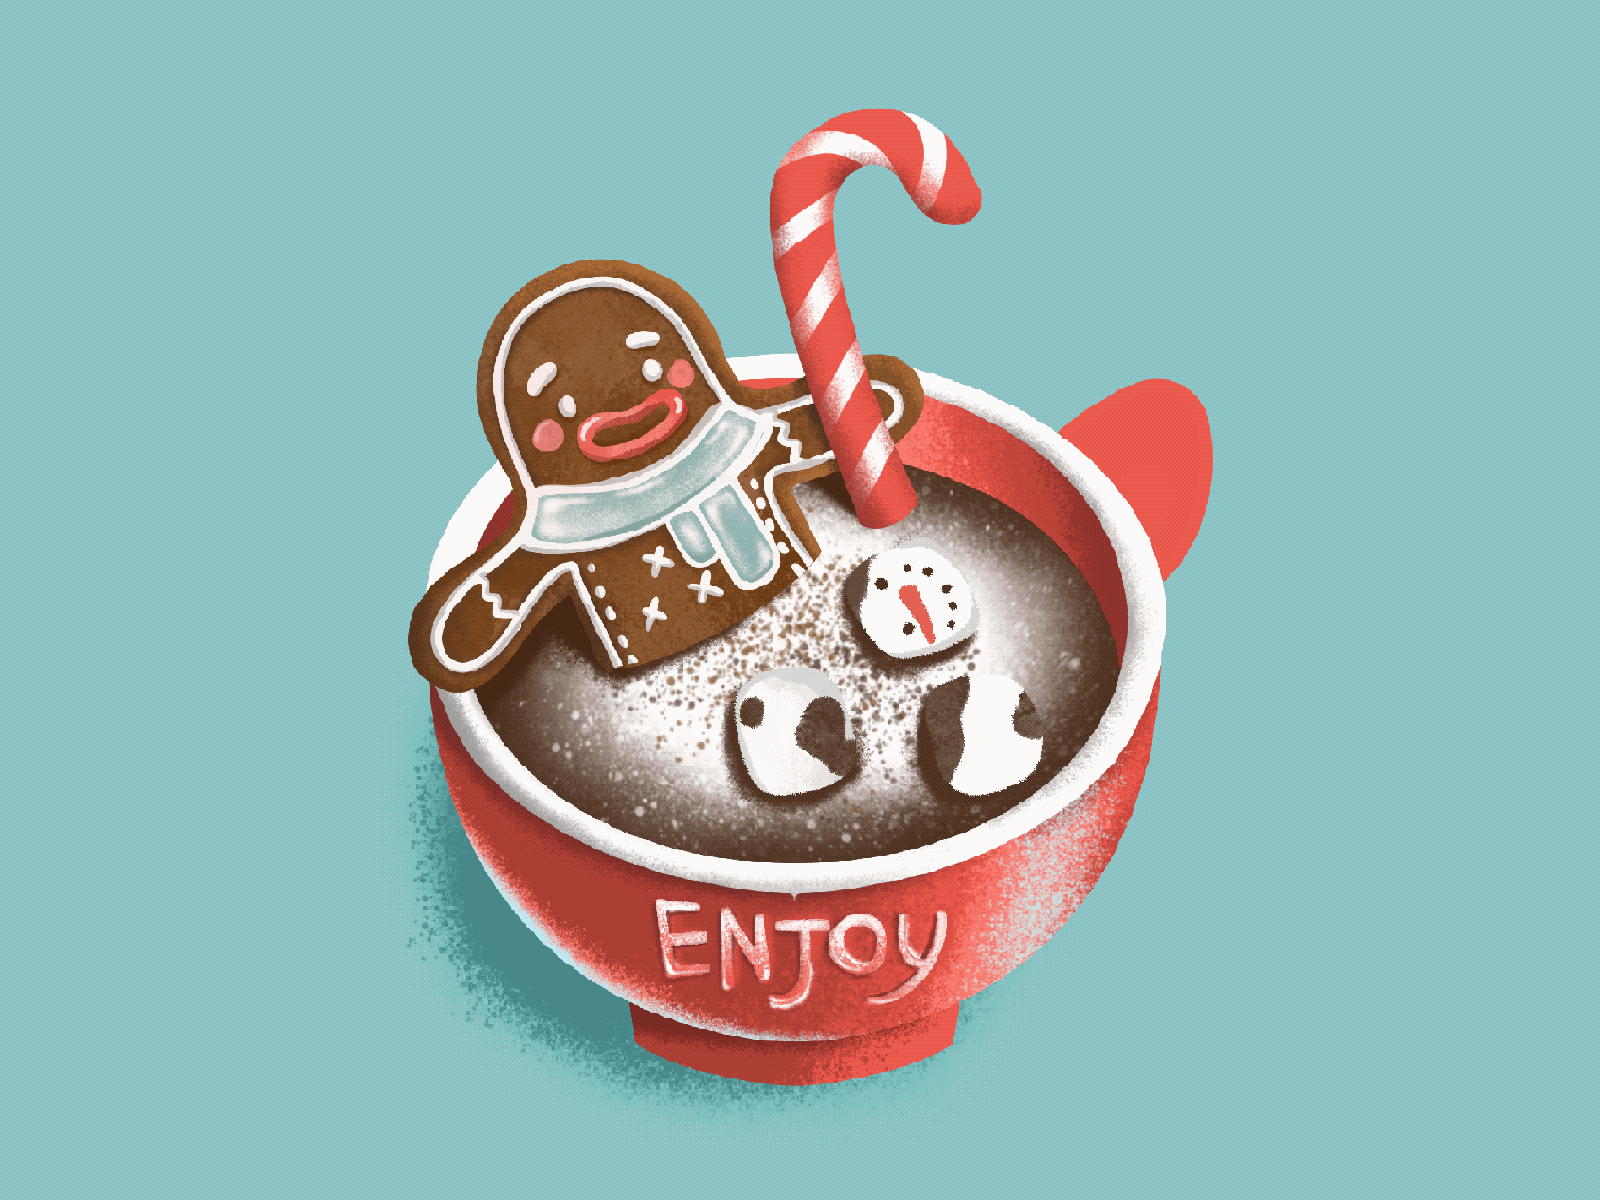 enjoy the little things chocolate christmas cookie cup festival holiday illustrator merry xmas merrychristmas procreat5 procreate snowman sweet winter